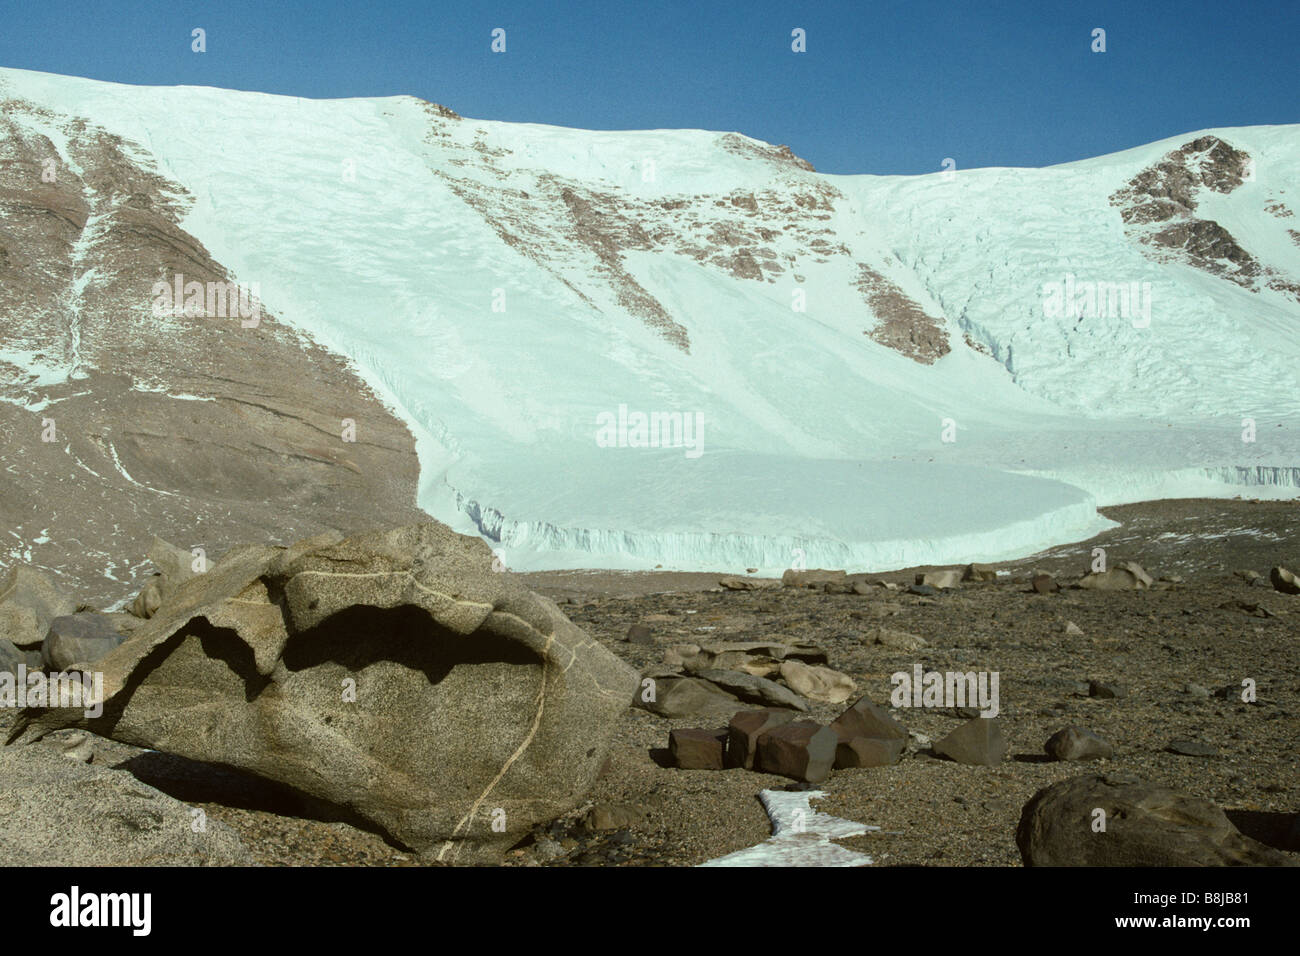 Ventifacts and glaciers in the scenic McMurdo Dry Valleys, Antarctica. Stock Photo